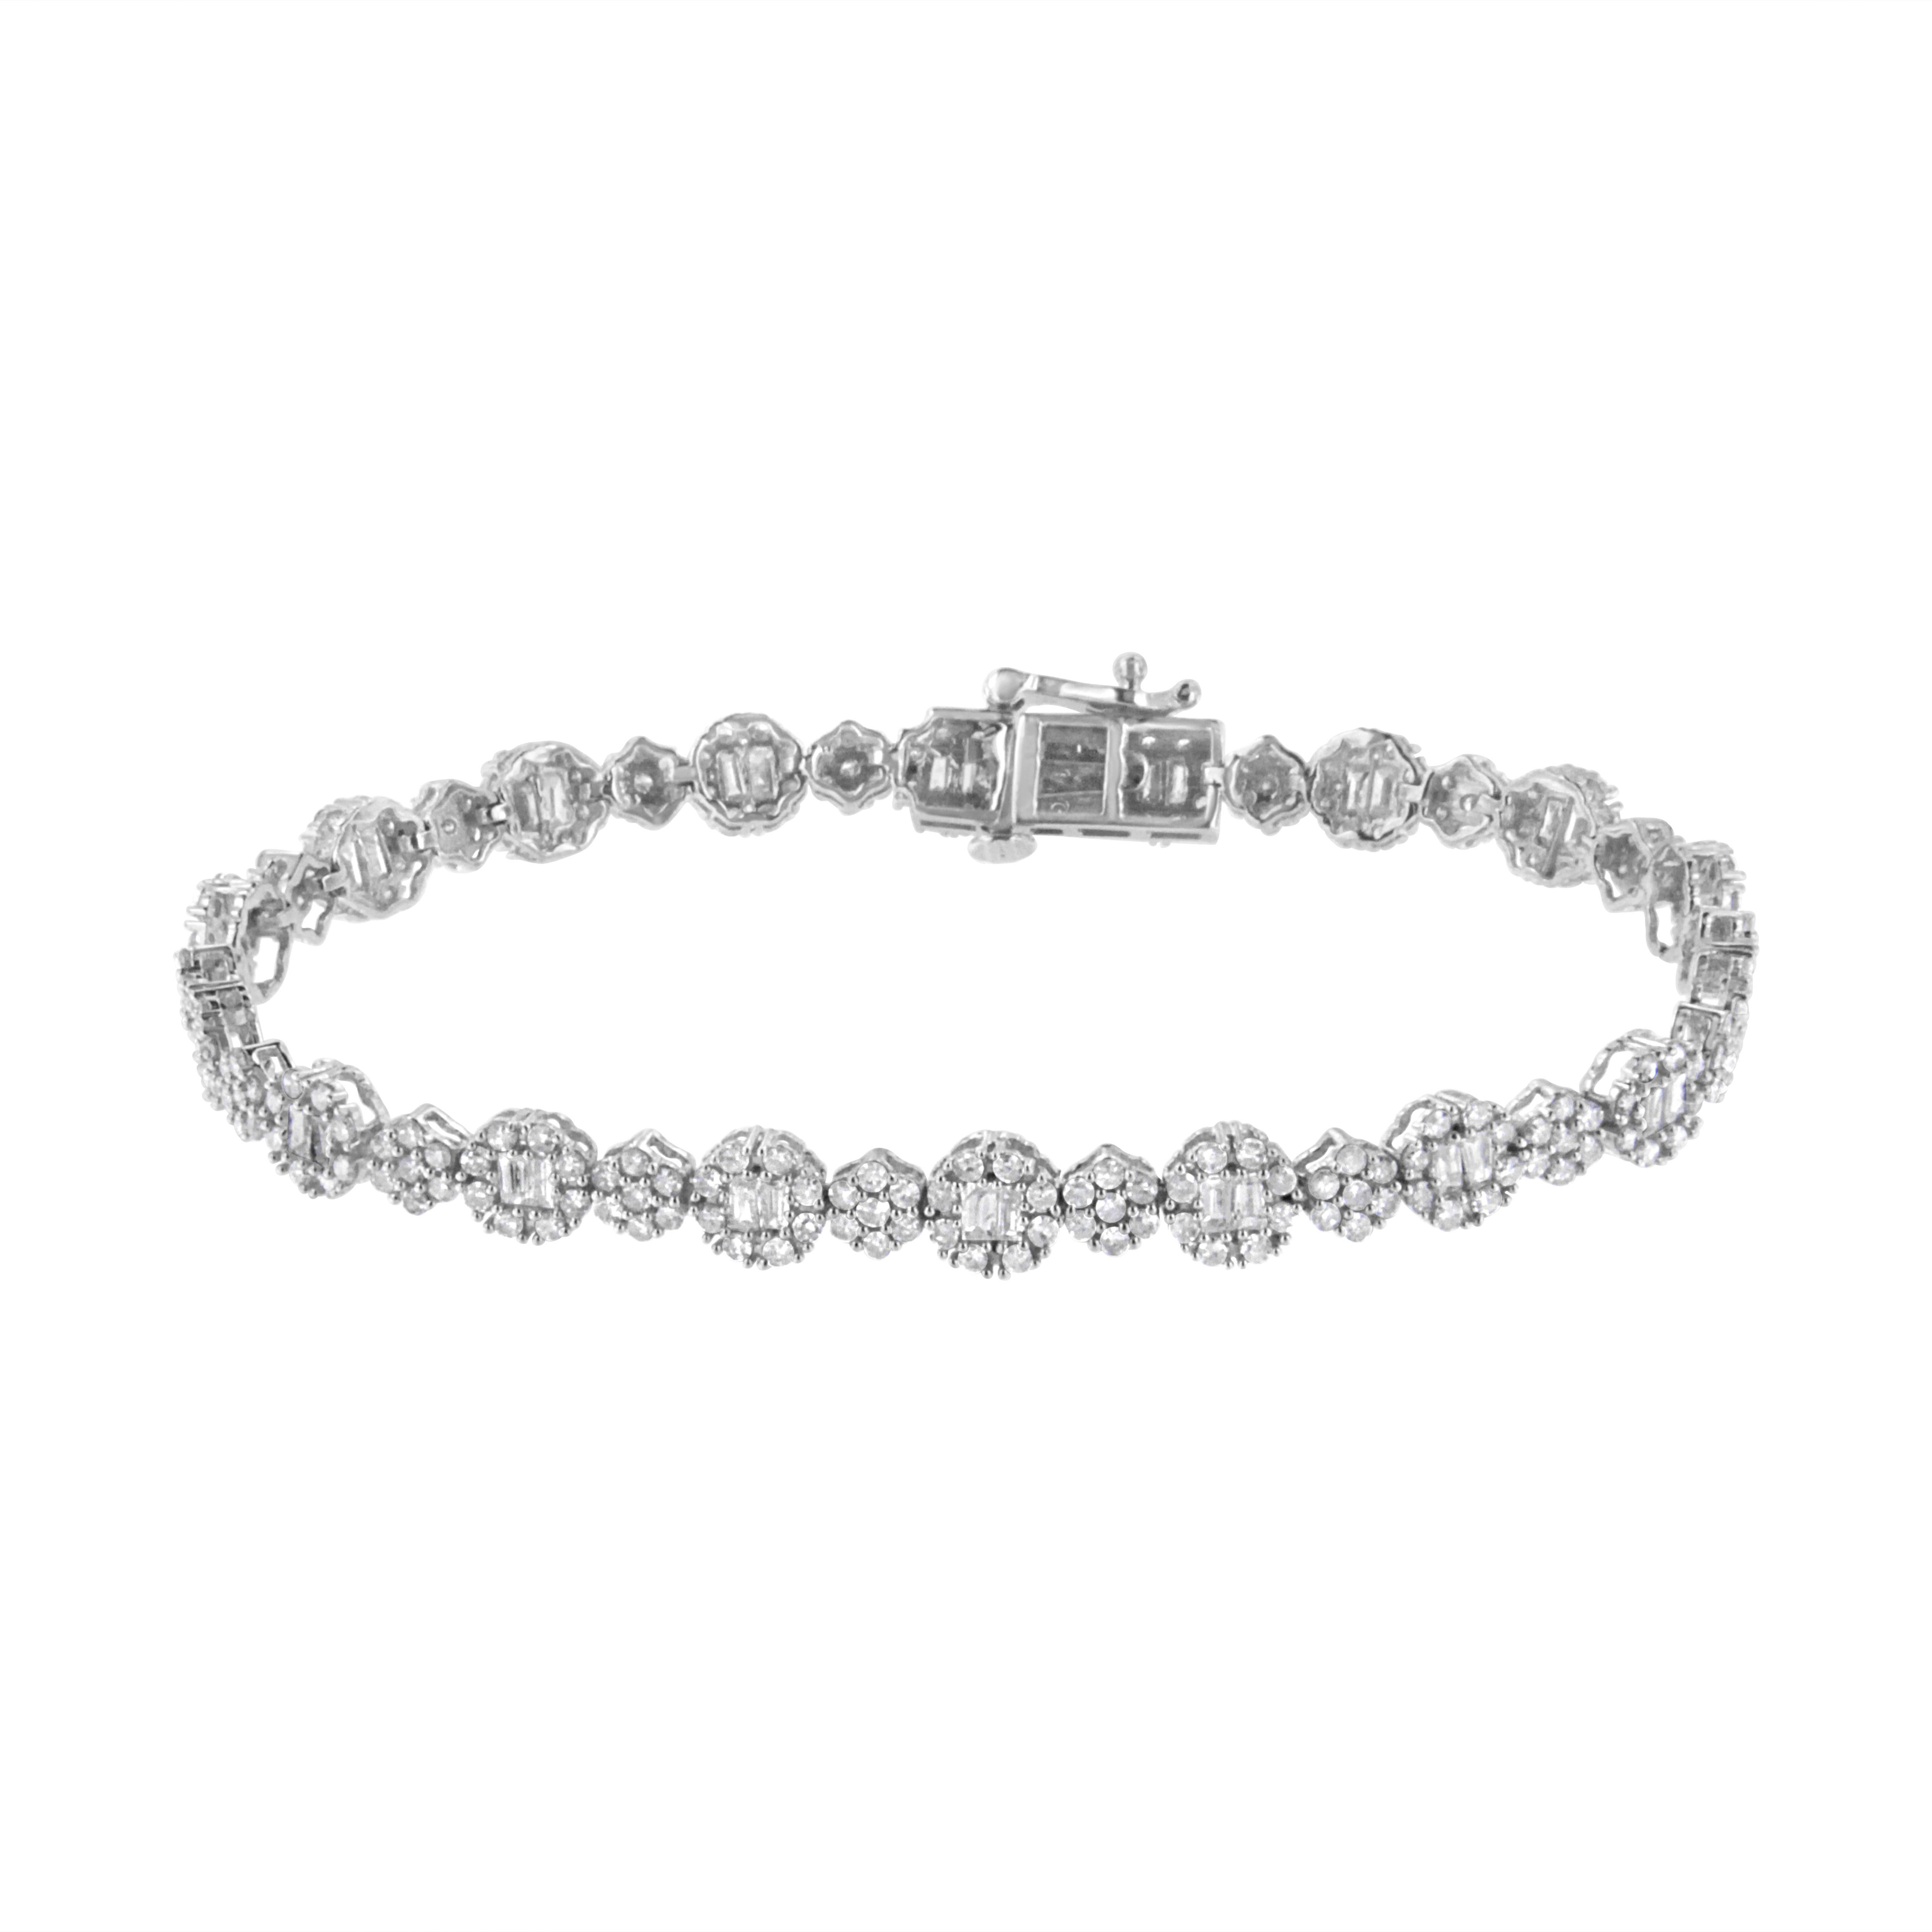 Add a little sparkle to your outfit with this 10k white gold bracelet that features 4 carats of natural diamonds. 306 color treated diamonds dazzle in this link bracelet design. Baguette cut diamonds sit at the heart of a round cut diamond halo and